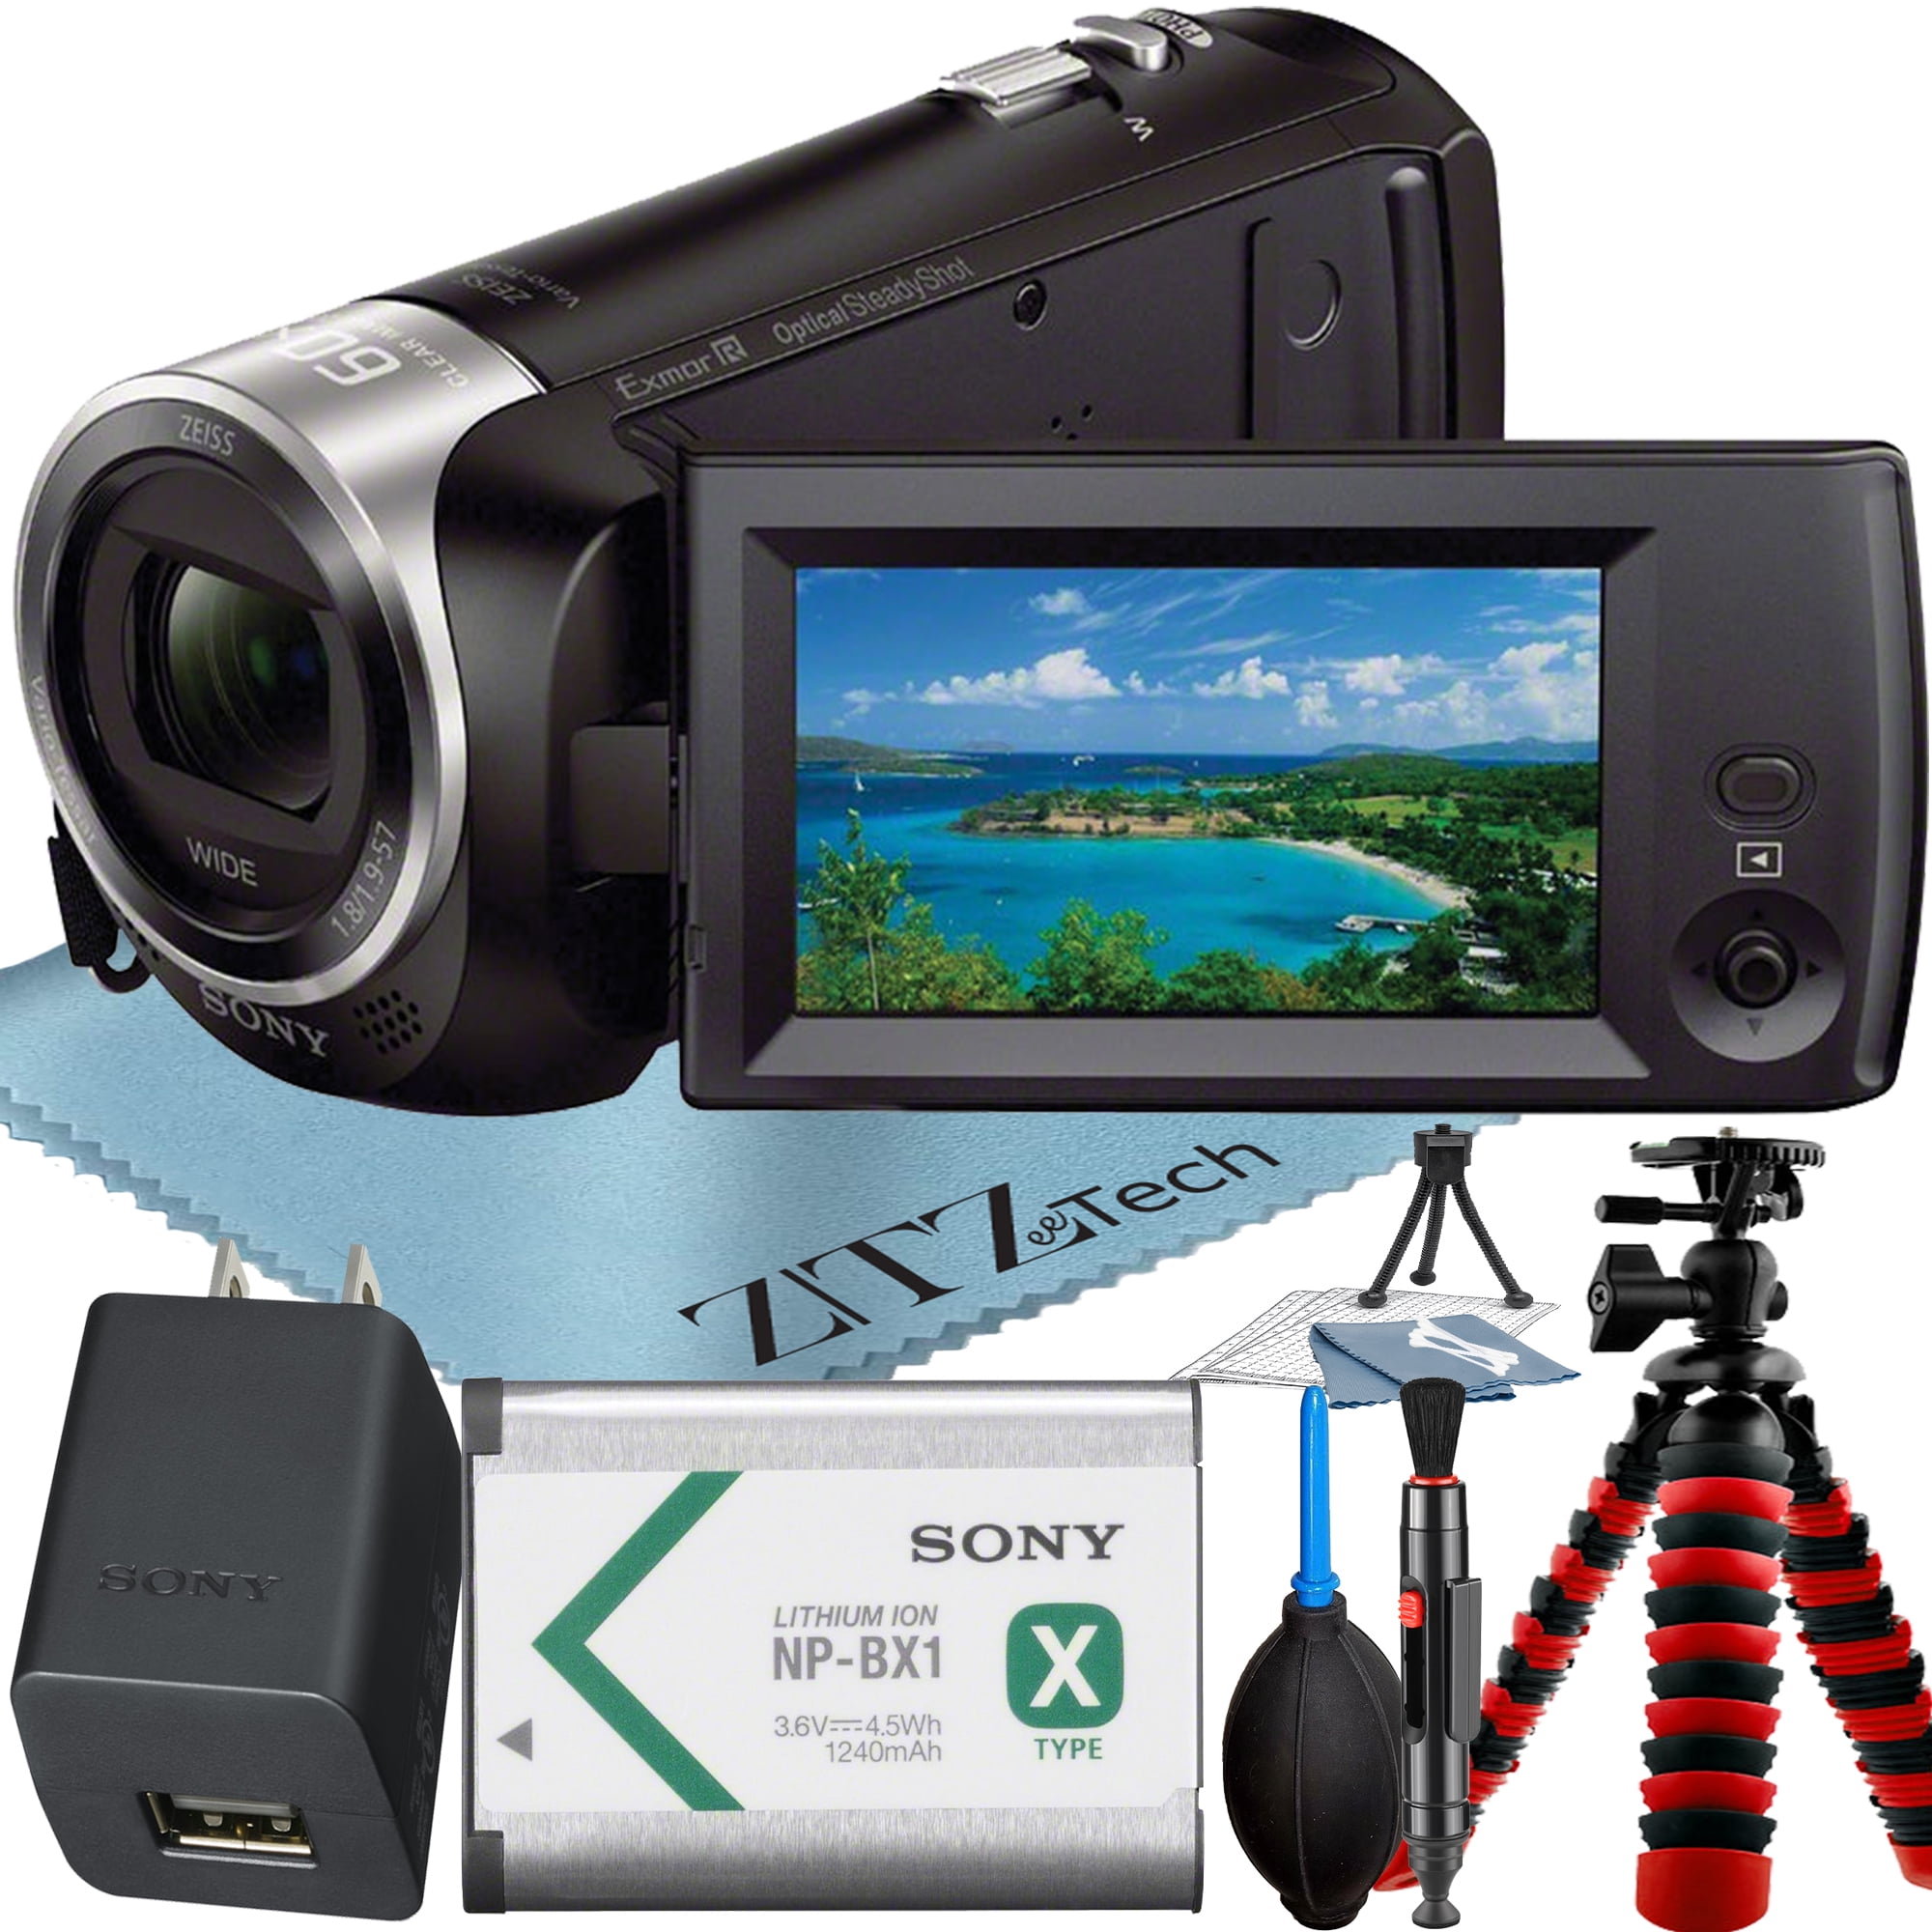 Sony HDR-CX405 HD Handycam Camcorder Video Recording with + Cleaning + ZeeTech Accessory Bundle -